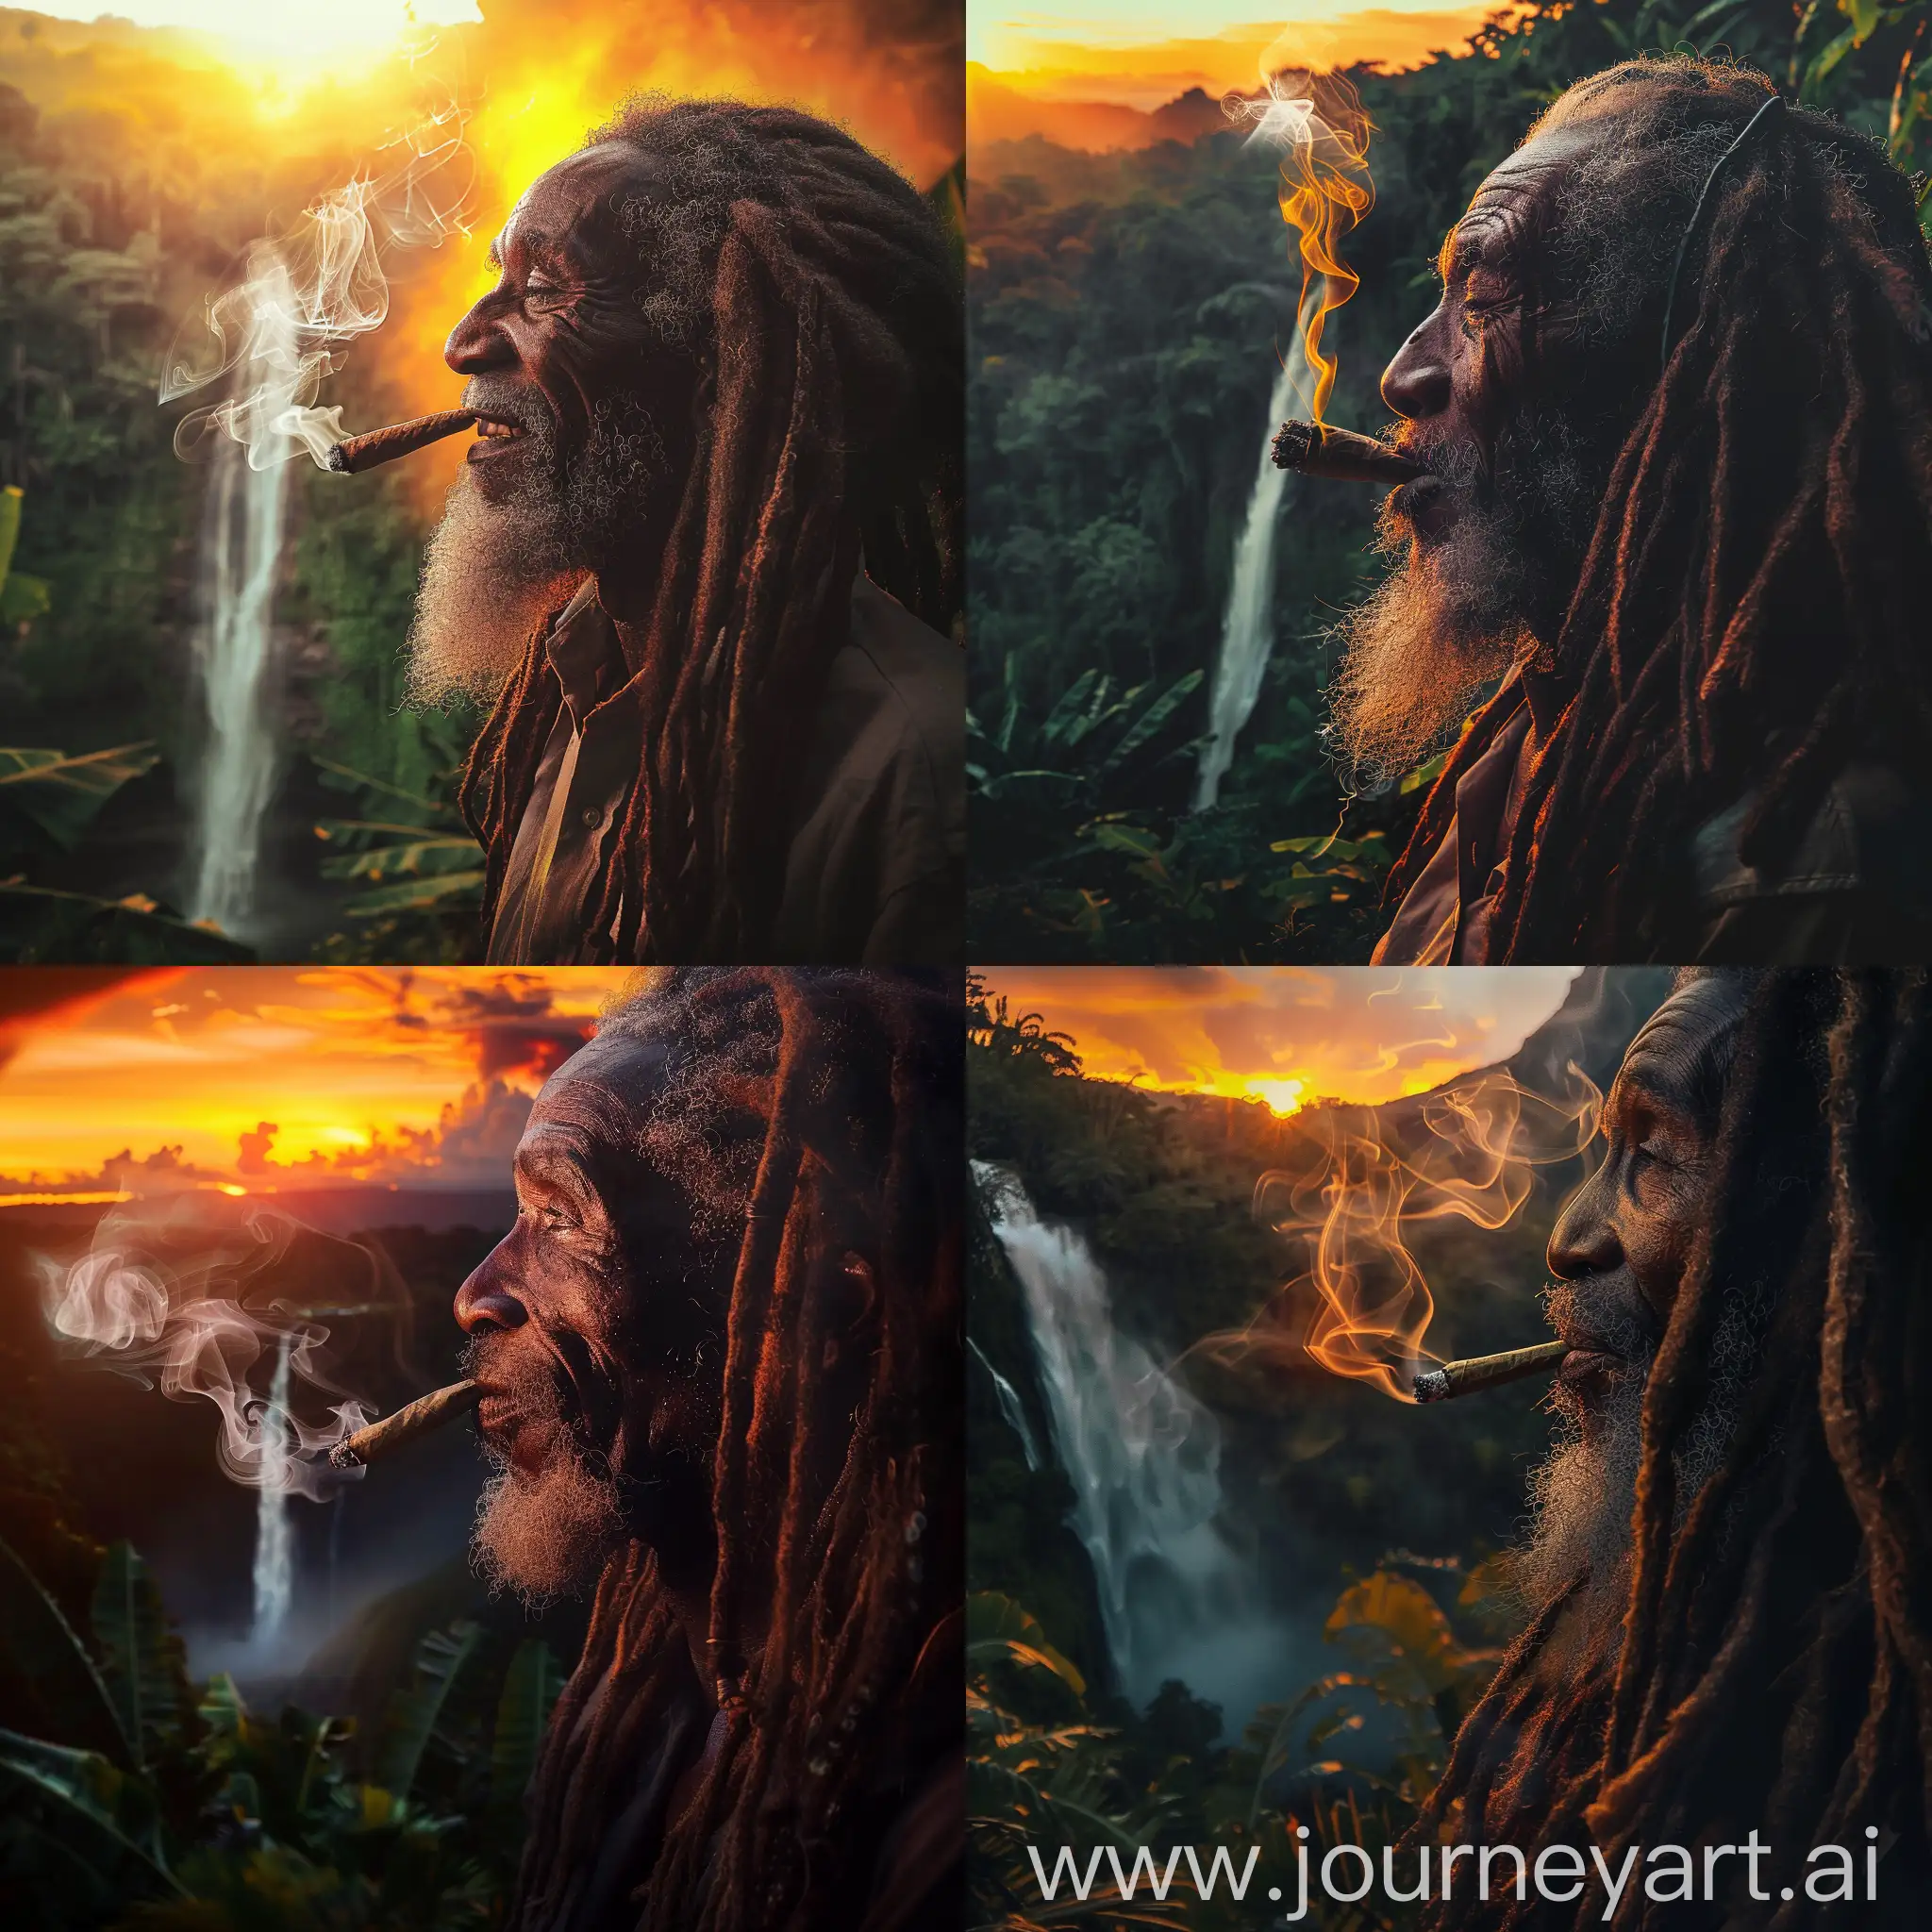 a happy Old rastafari man with dreadlocks smoking a spliff in banana plantation up in the Jamaican mountains by a waterfall at sunset. his face is lit from the side, the smoke is lit by orange light from the sunset. his facial contours are well defined by shadows